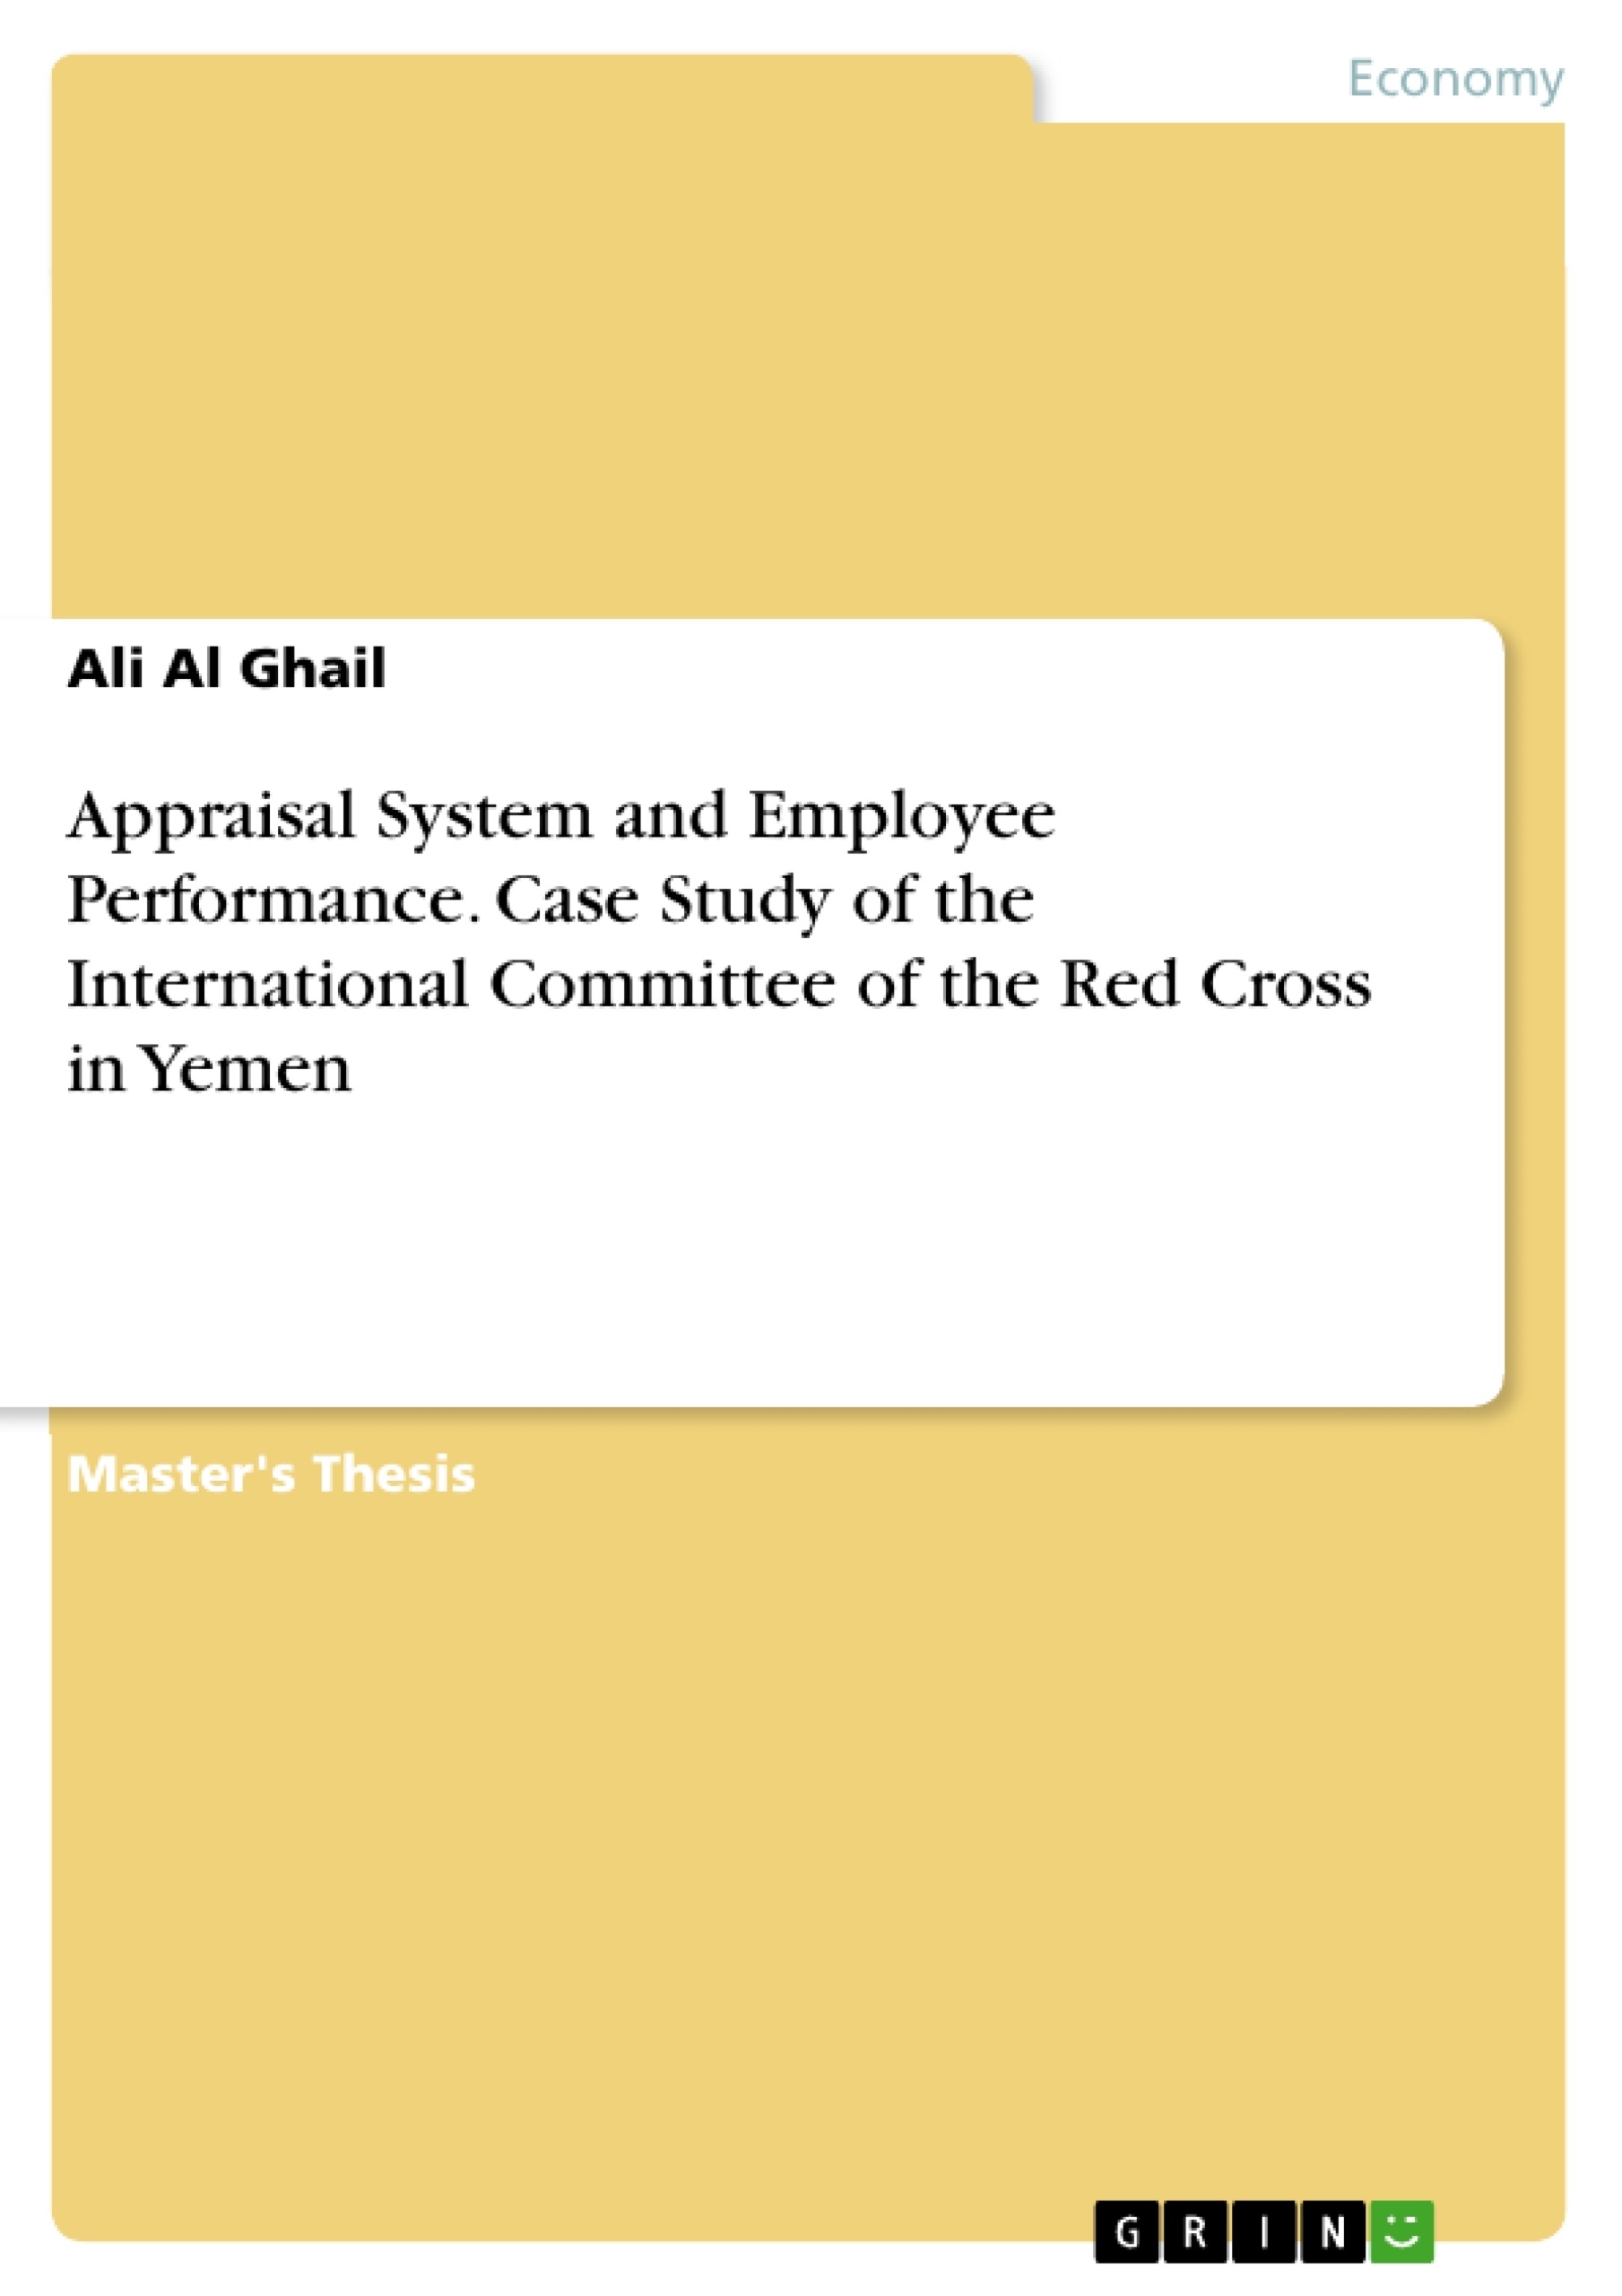 Cross　Case　Appraisal　Employee　of　of　Red　the　Performance.　Committee　System　in　the　International　and　GRIN　Study　Yemen